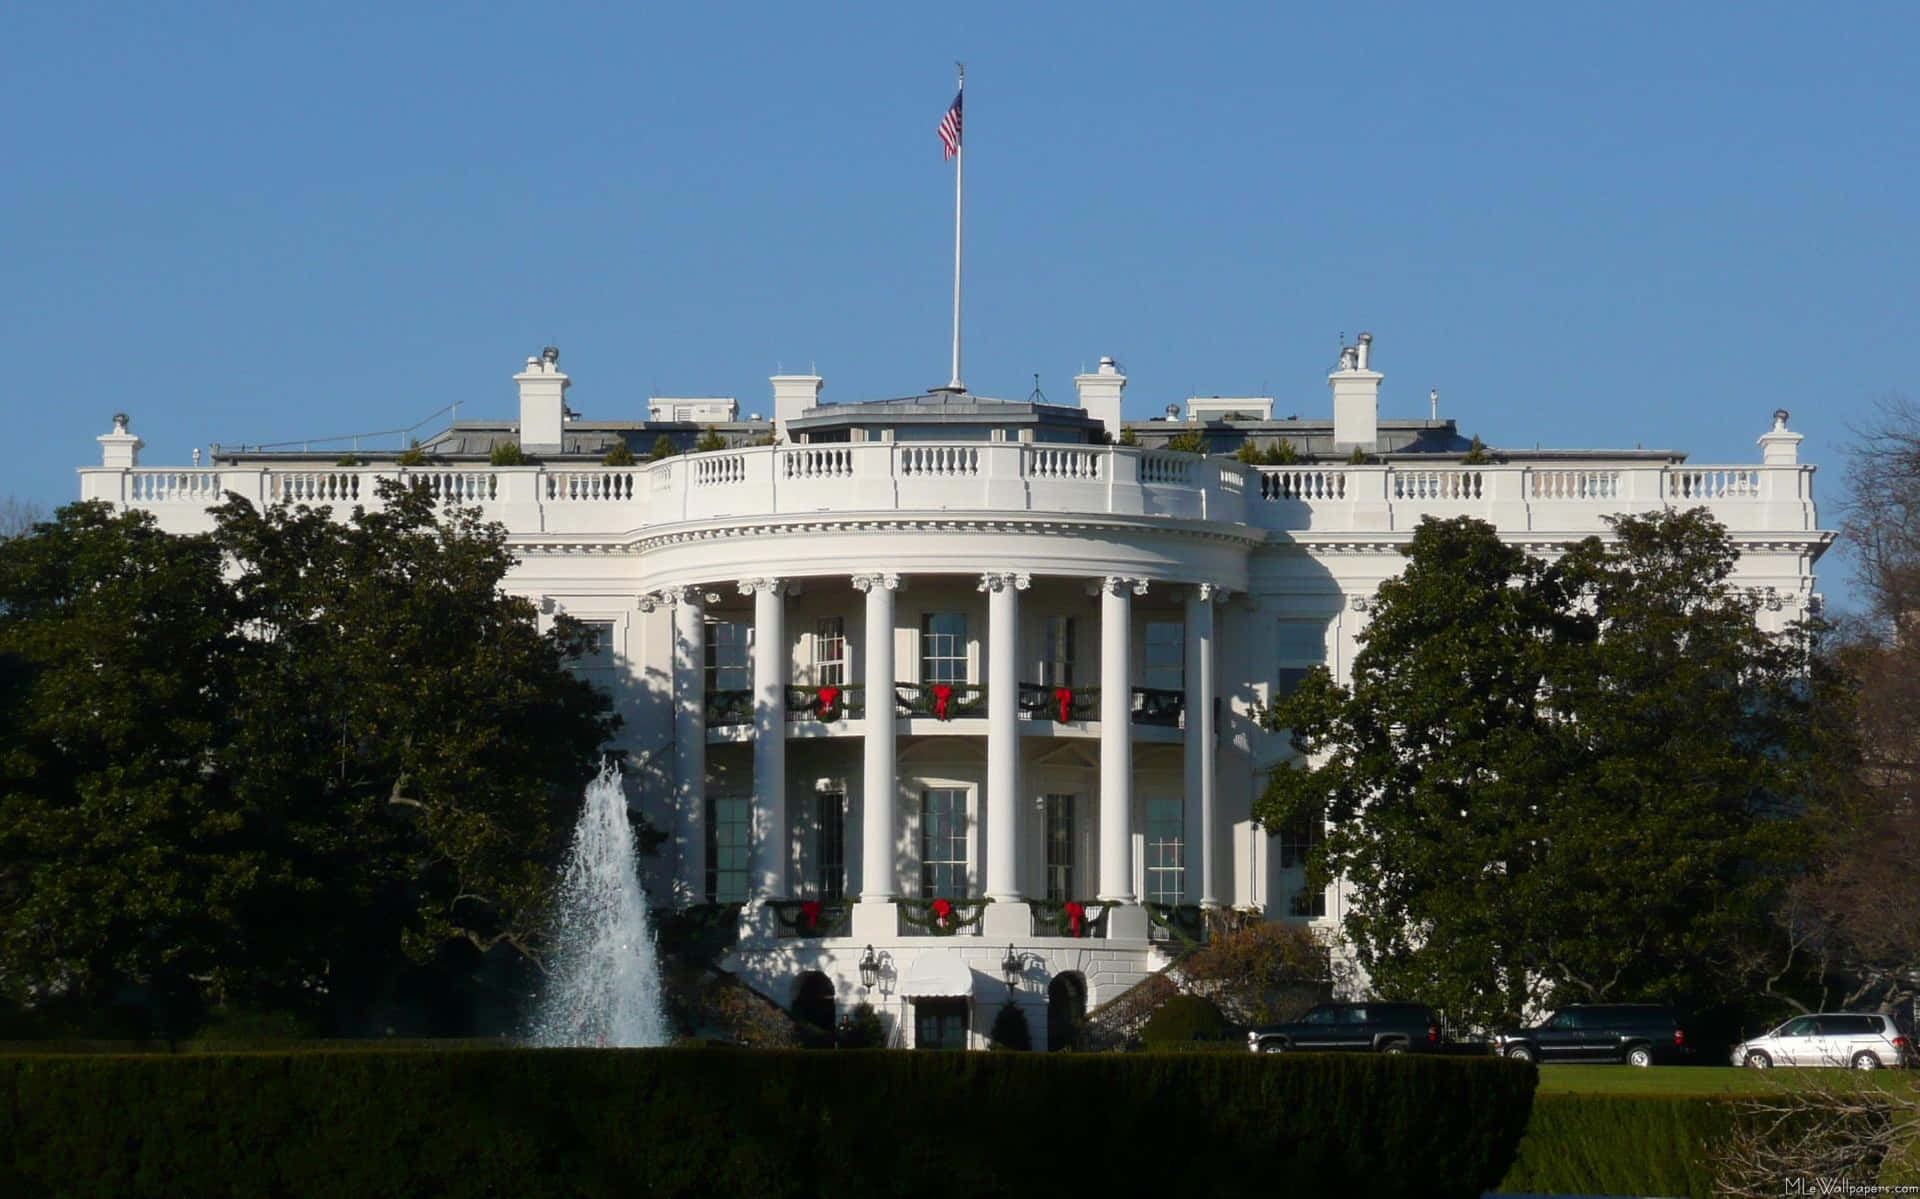 An iconic image of the White House